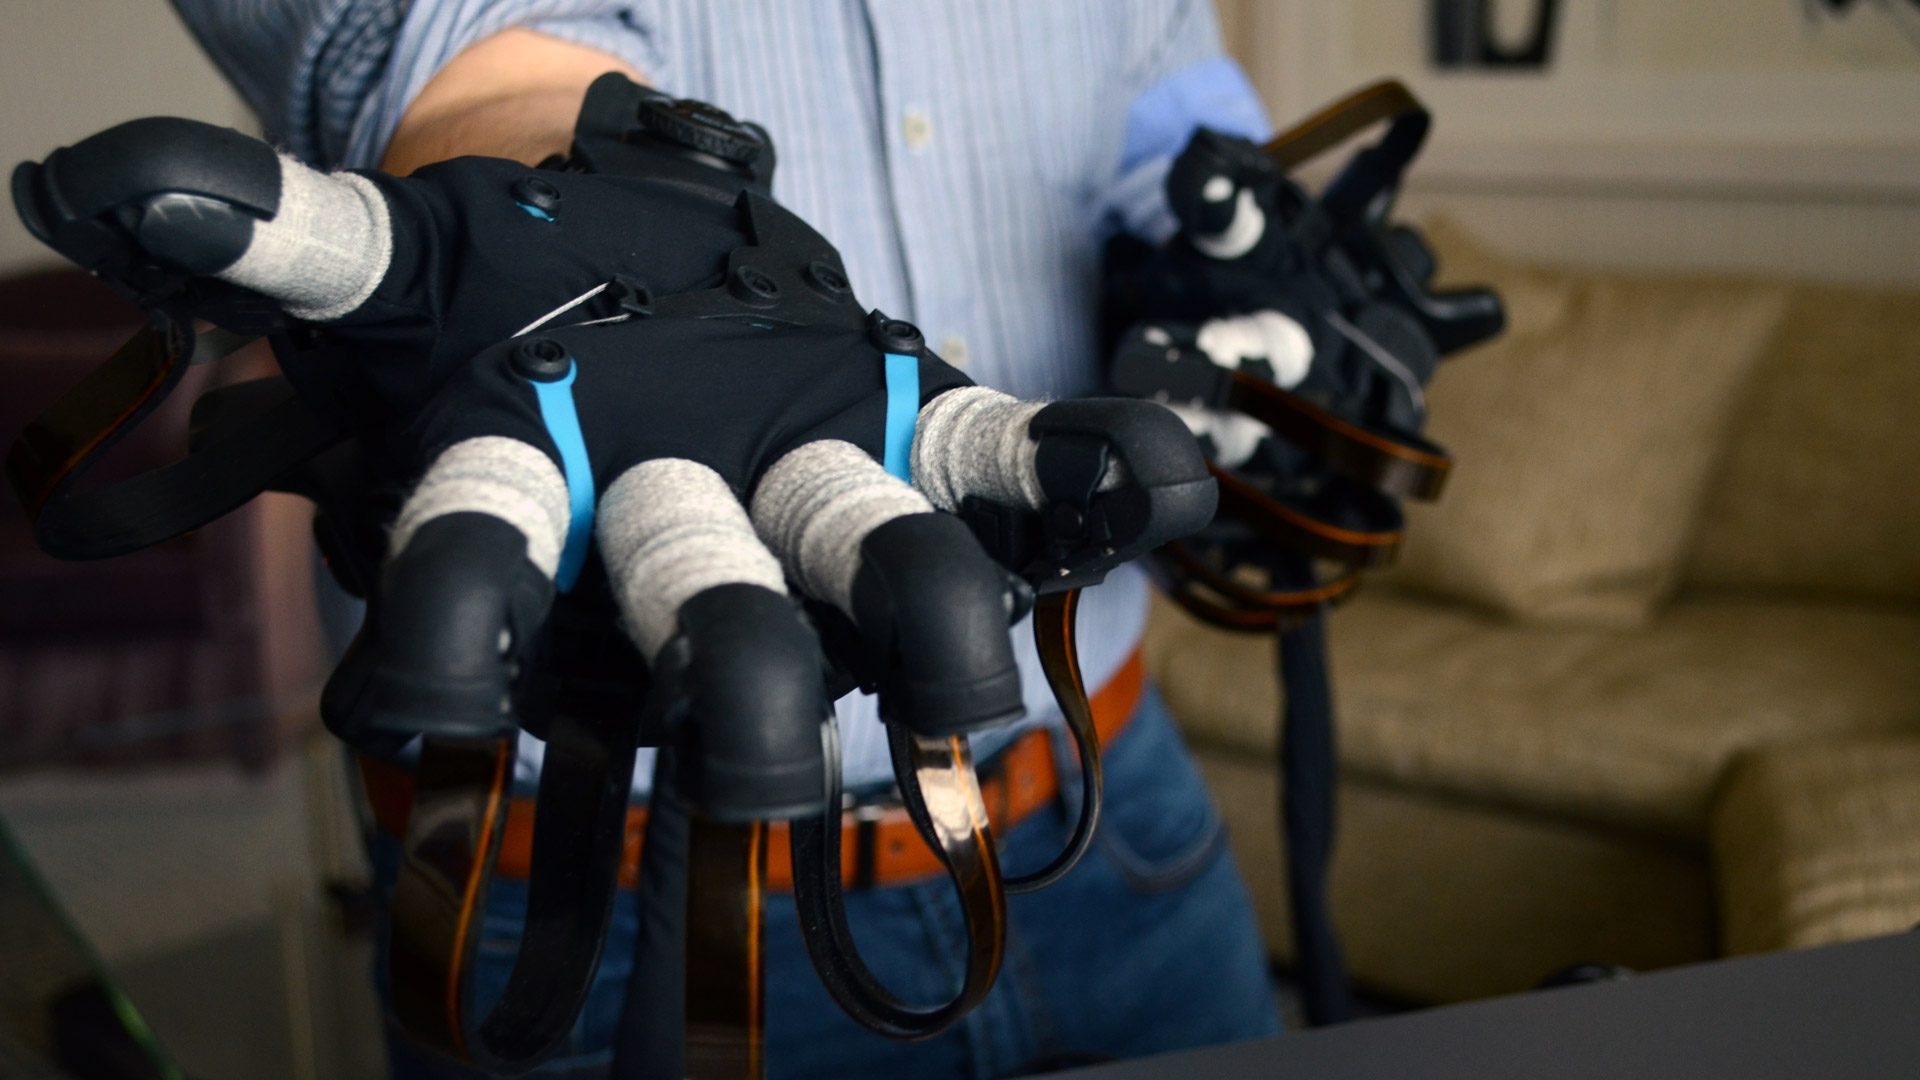 HaptX's VR Glove is the Closest I've Come to Touching Virtual World